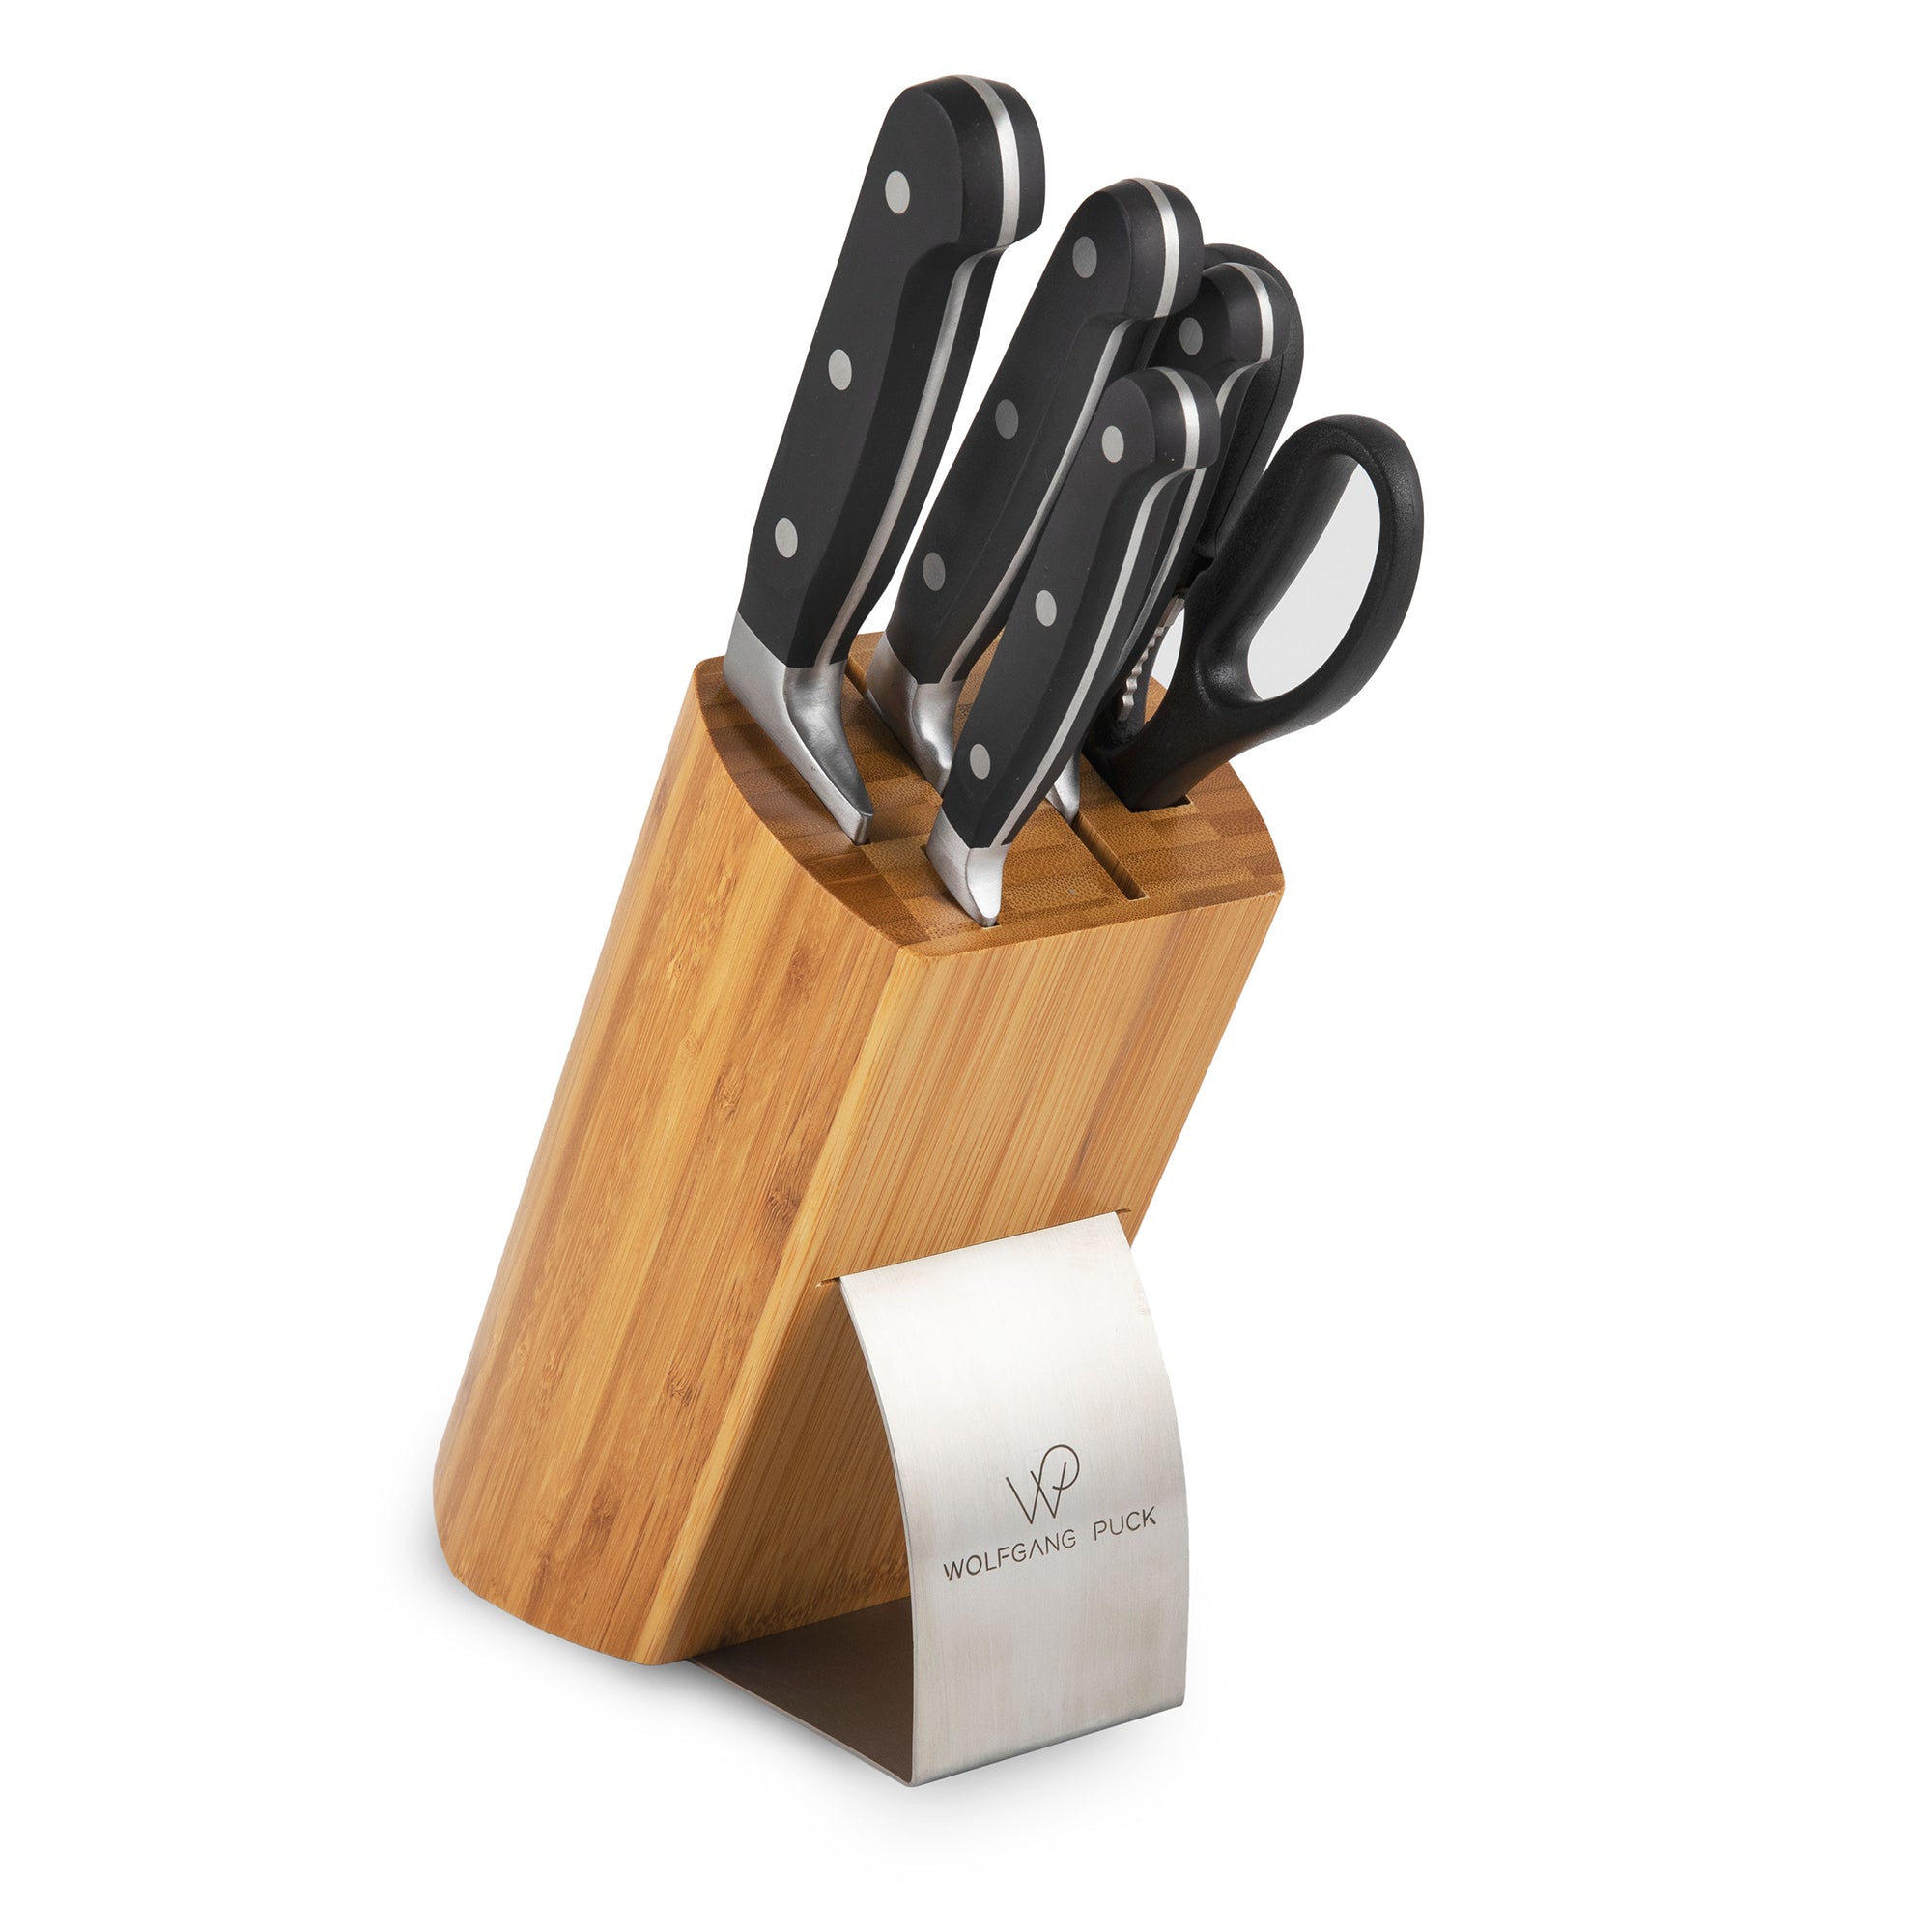  Wolfgang Puck 6-Piece Fully-Forged Stainless Steel Knife Set  with Knife Block; Carbon Stainless Steel Blades and Ergonomic Handles;  Blonde Wood Block with Acrylic Safety Shield; Chef Quality Cutlery: Home &  Kitchen